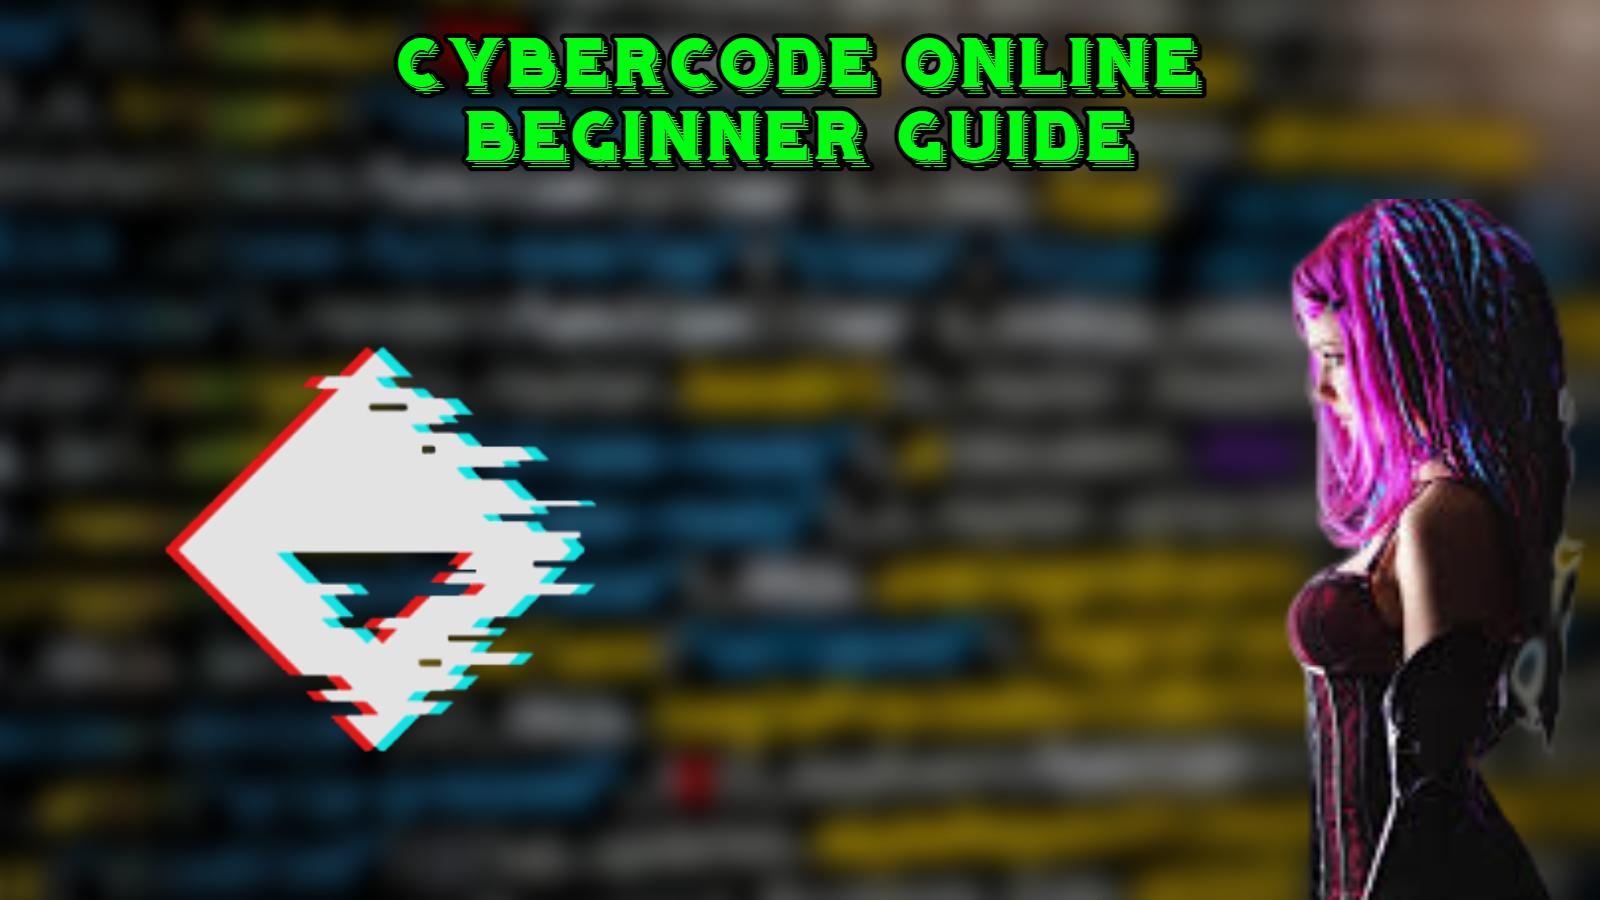 You are currently viewing Cybercode Online Beginner Guide